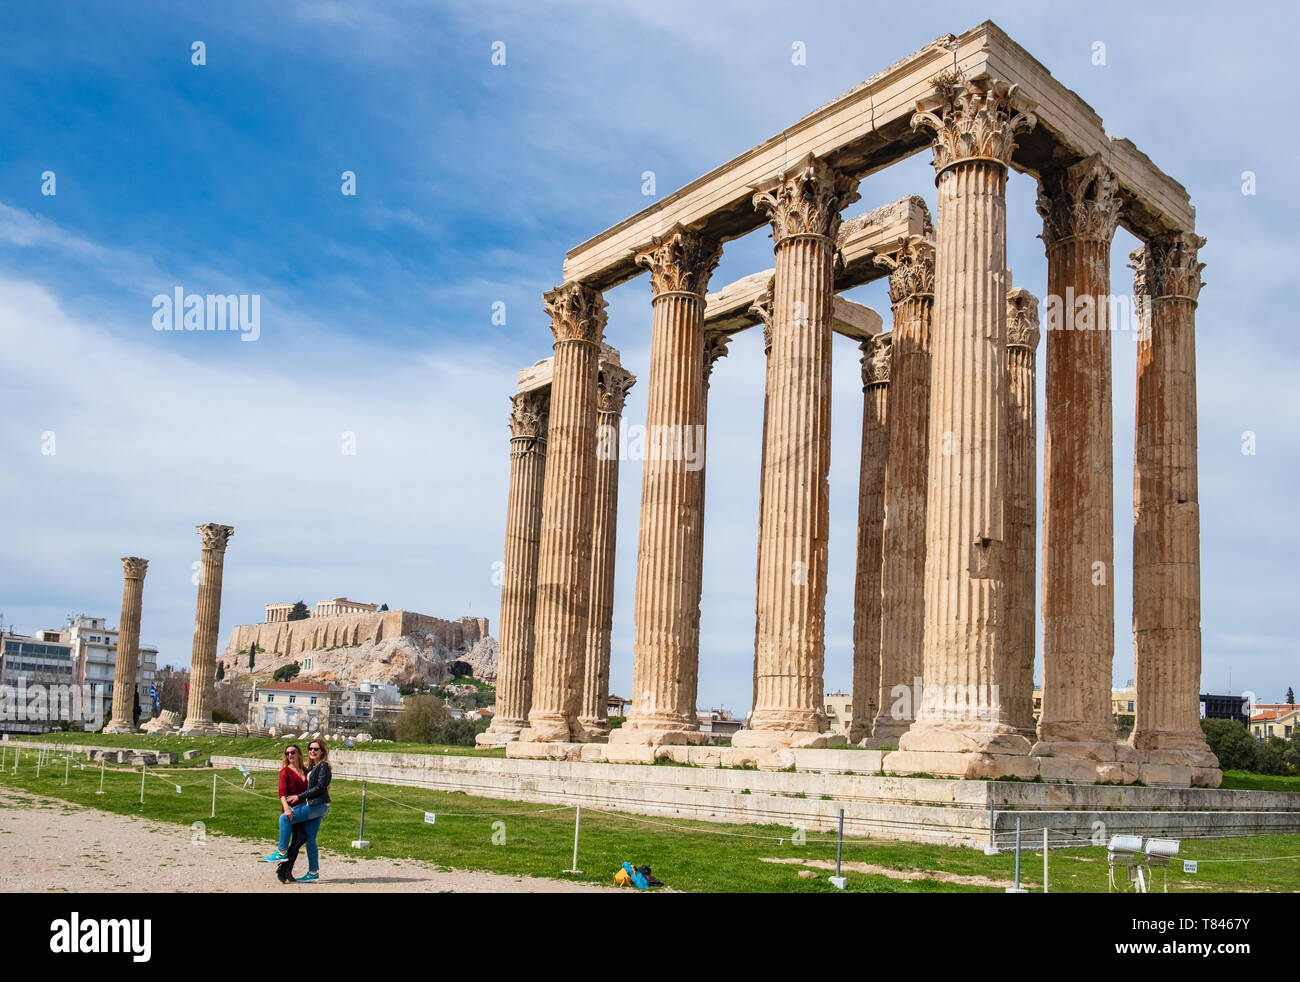 Athens, Greece - March 9, 2019: Tourists being photographed in front of the Greek Temple of Olympian Zeus with the Acropolis of Athens in the backgrou Stock Photo